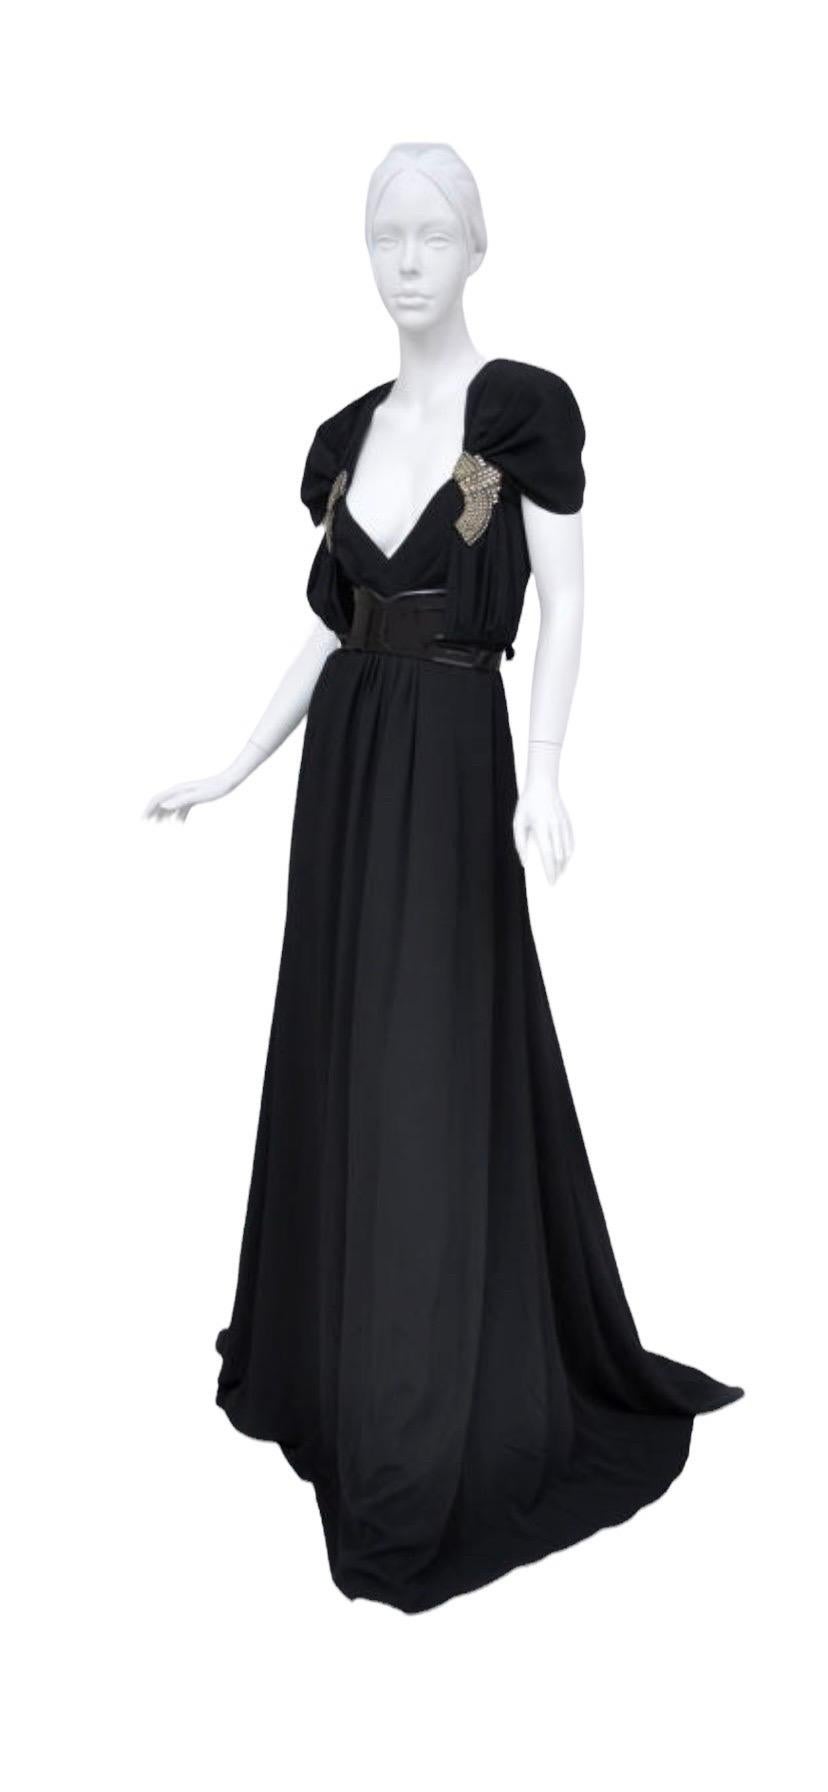 Gucci's Black Gown Dazzles with Classic Hollywood Glamour.
Italian size 42 ( US 6)
Embroidery with Crystals and Chains, Black Patent Leather Belt, Fully Lined, Discreet Back Zipper.
Measurements: Length 66 inches, Bust 36